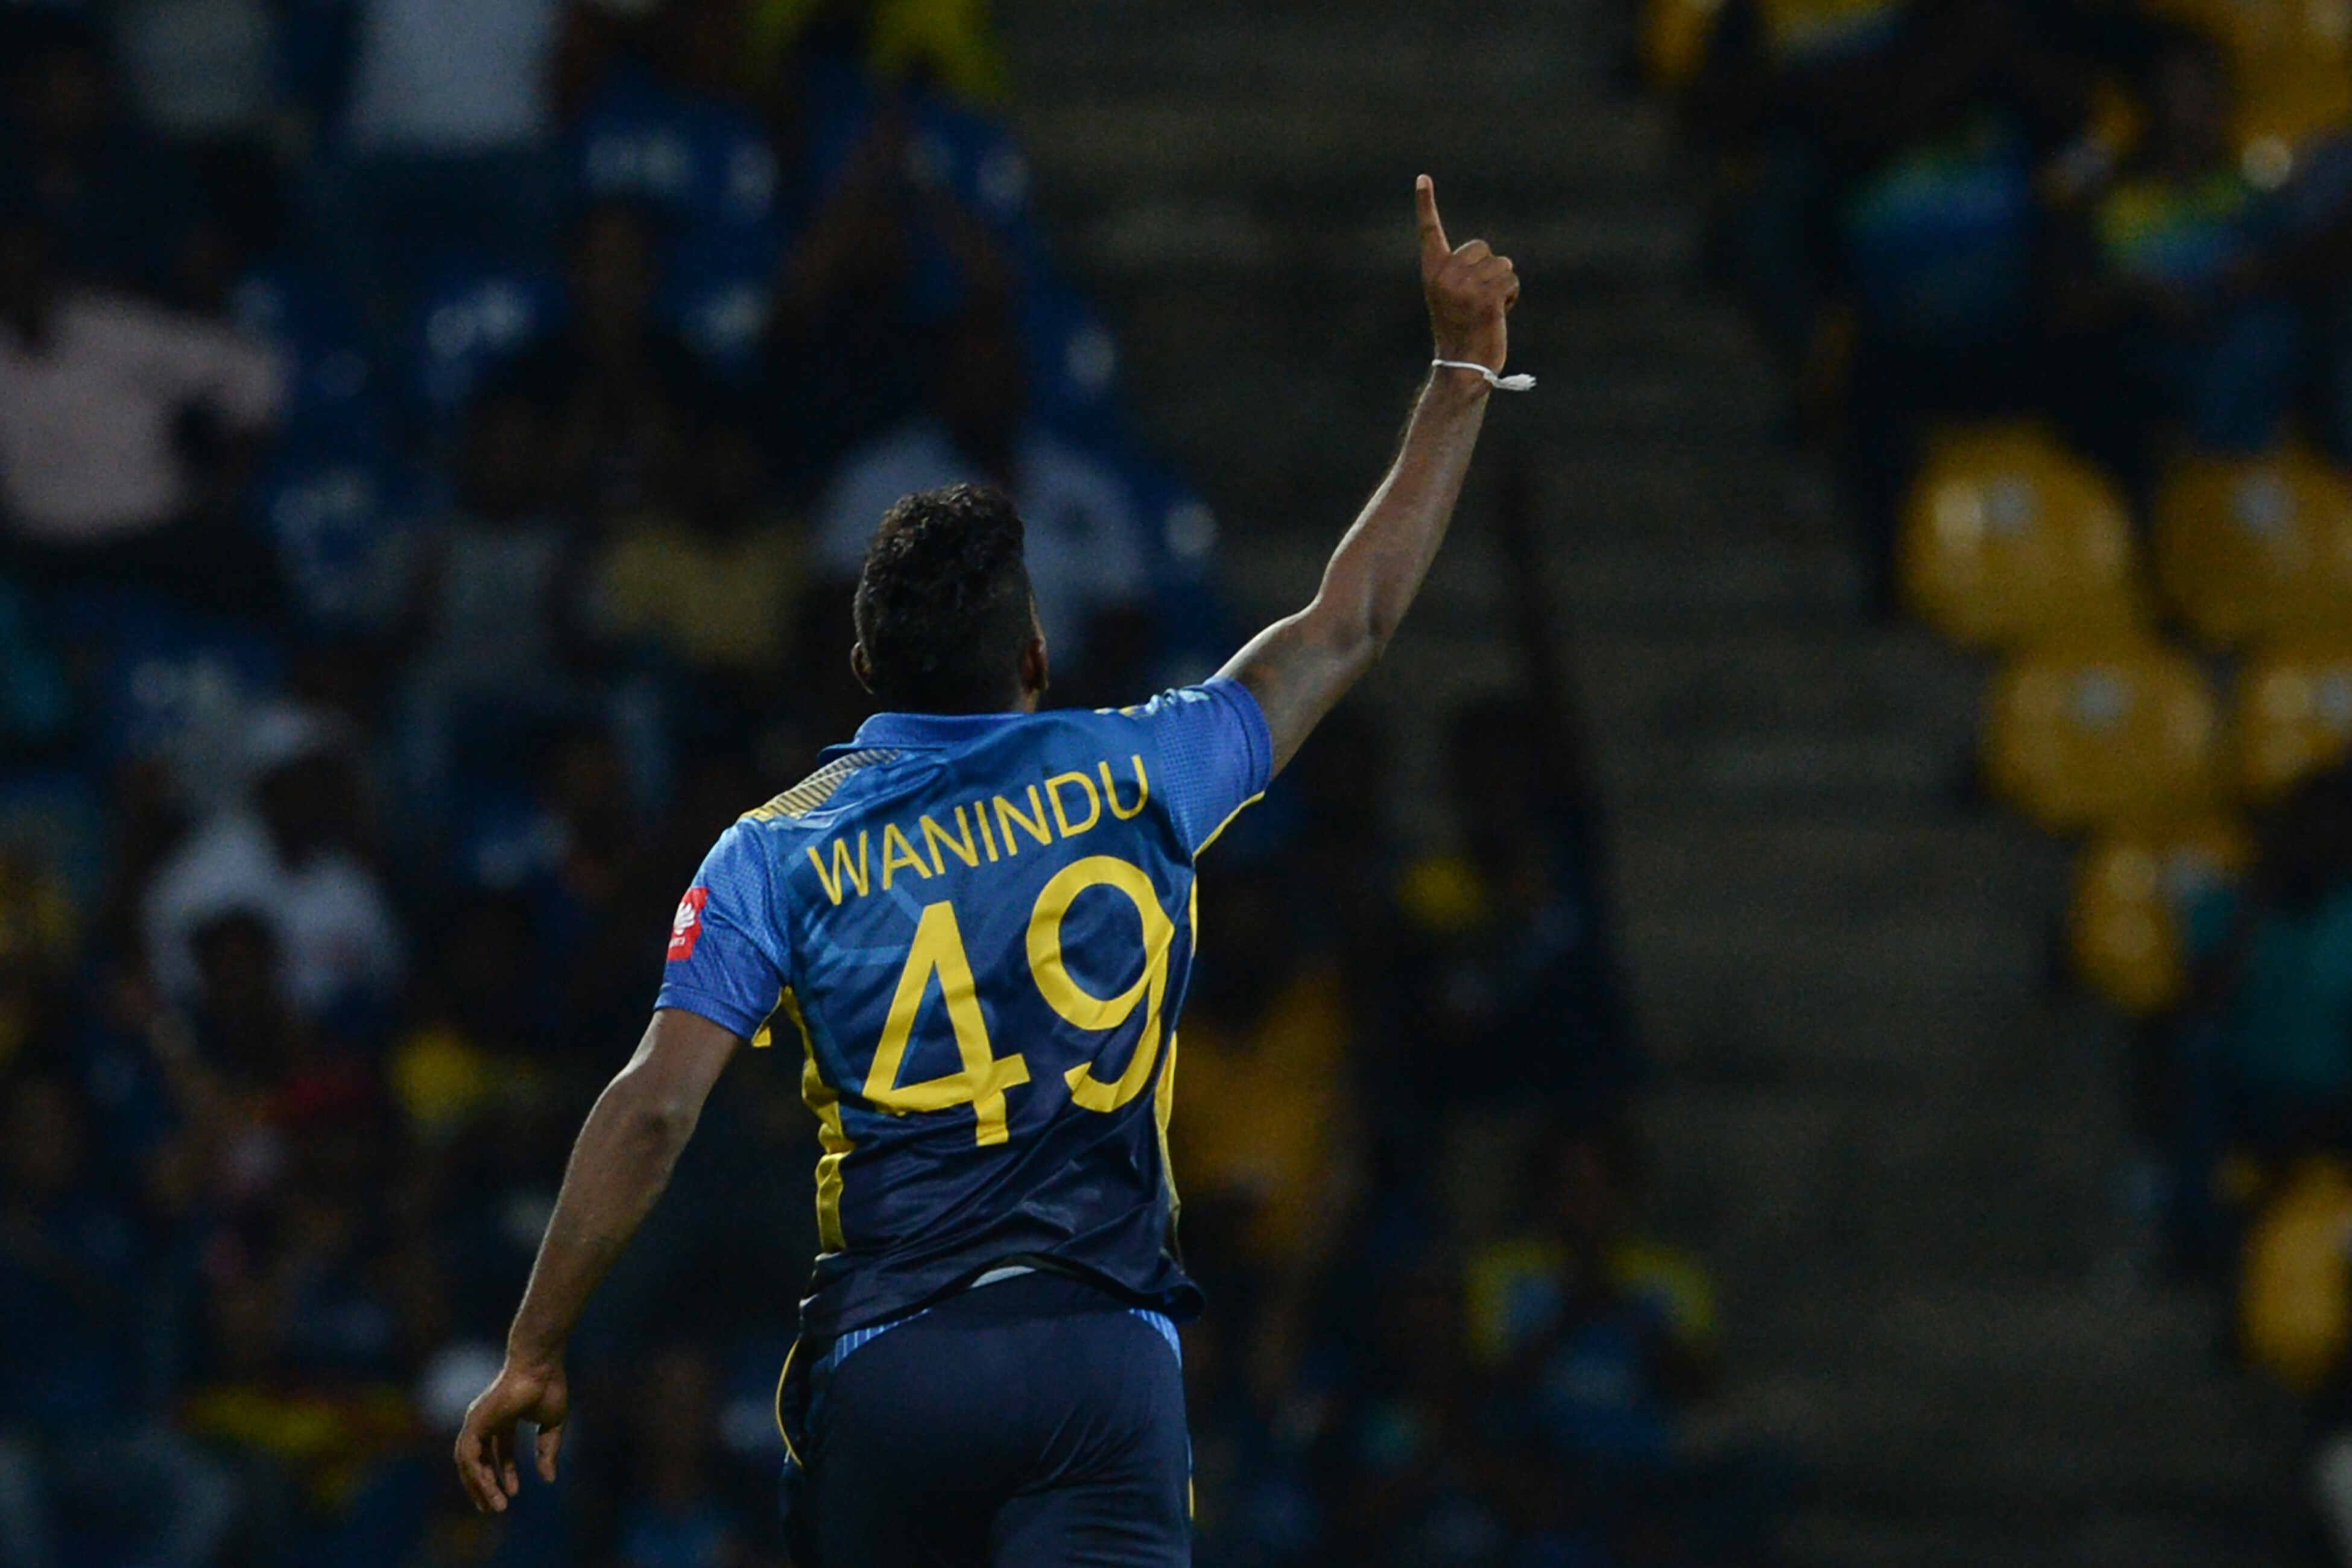 Wanindu Hasaranga Likely To Be Out of Asia Cup 2023